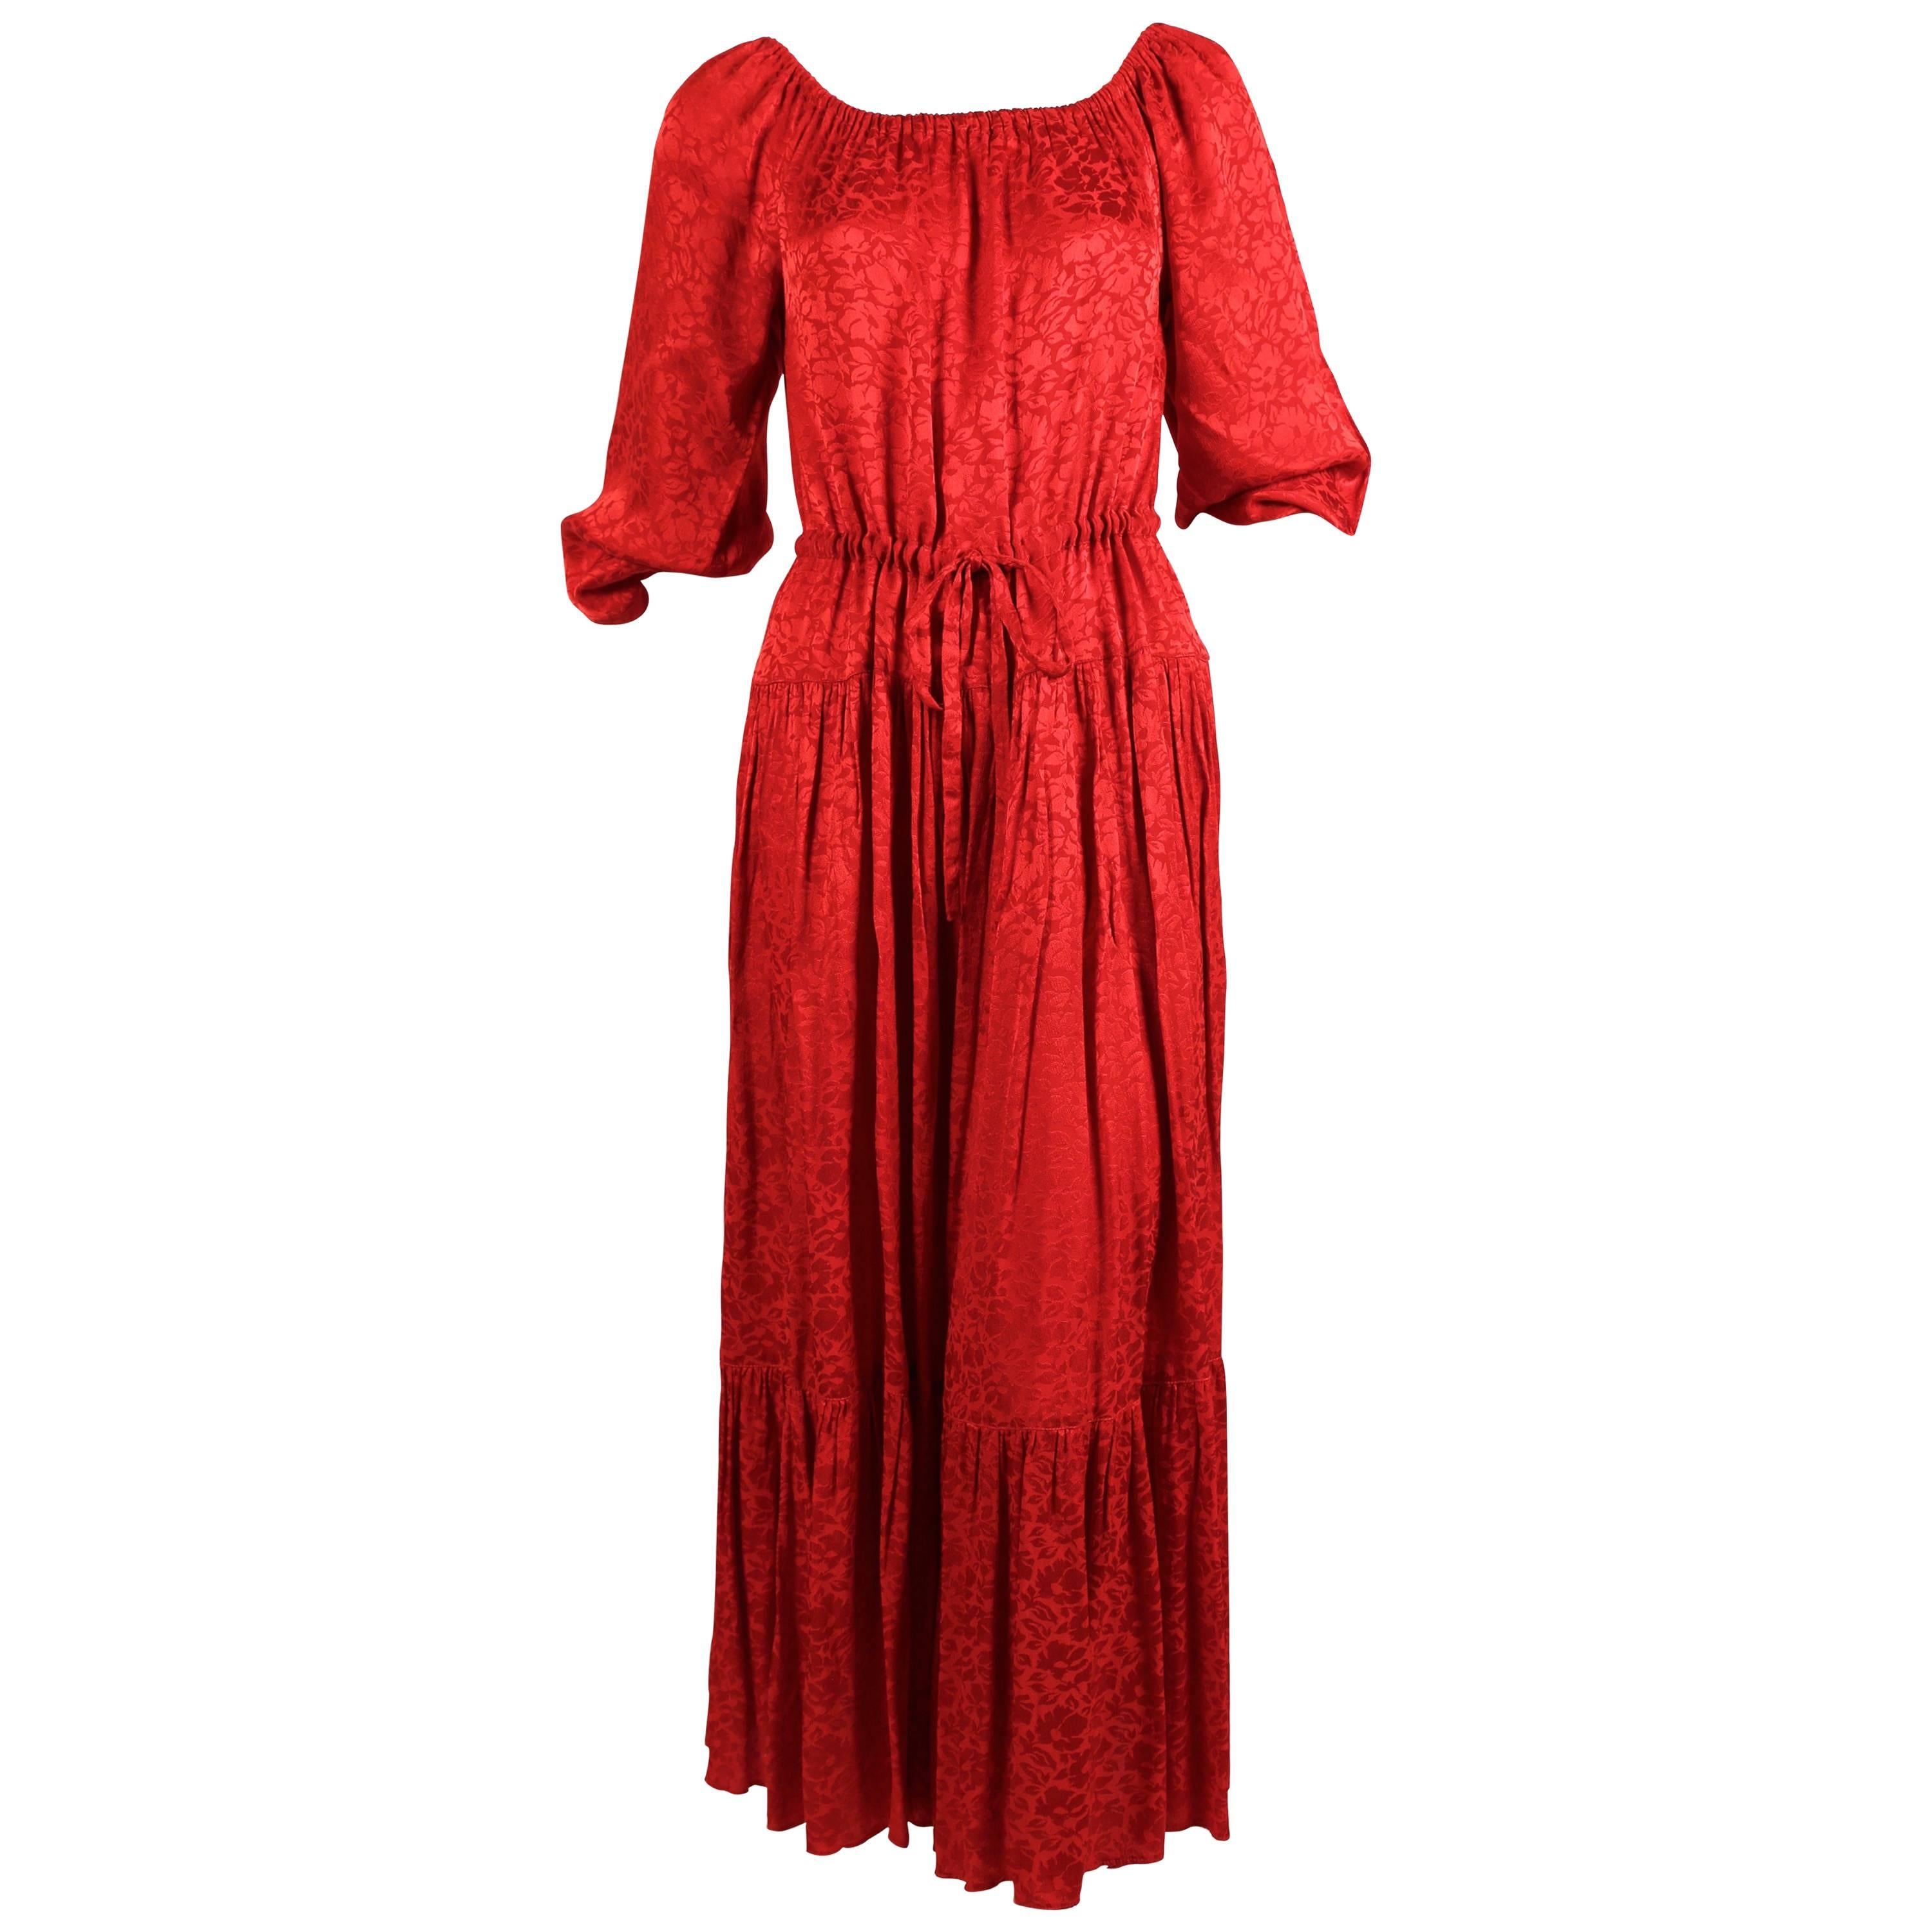 1970's OSSIE CLARK red floral damask dress